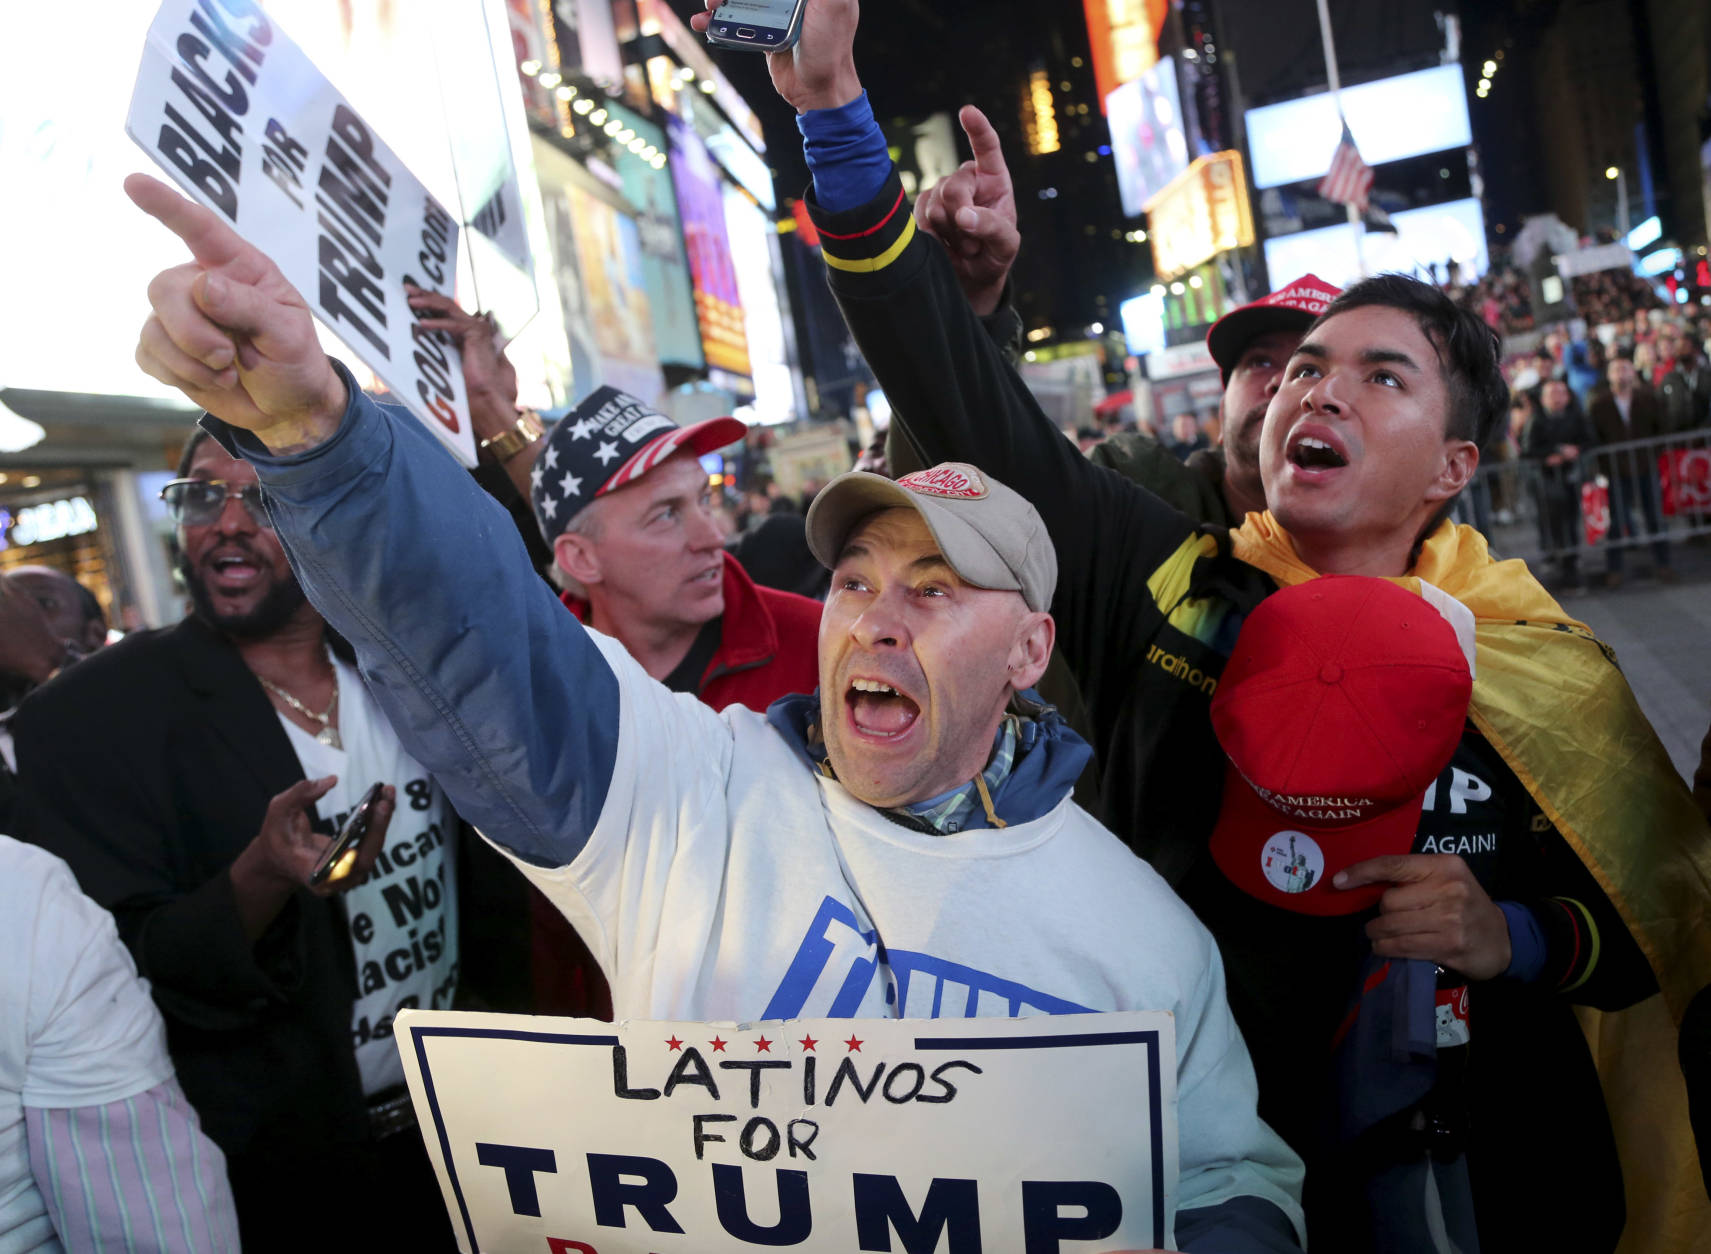 Supporters of Republican presidential candidate Donald Trump react to reports that he had won North Carolina while they were watching results in Times Square, New York, Tuesday, Nov. 8, 2016. (AP Photo/Seth Wenig)